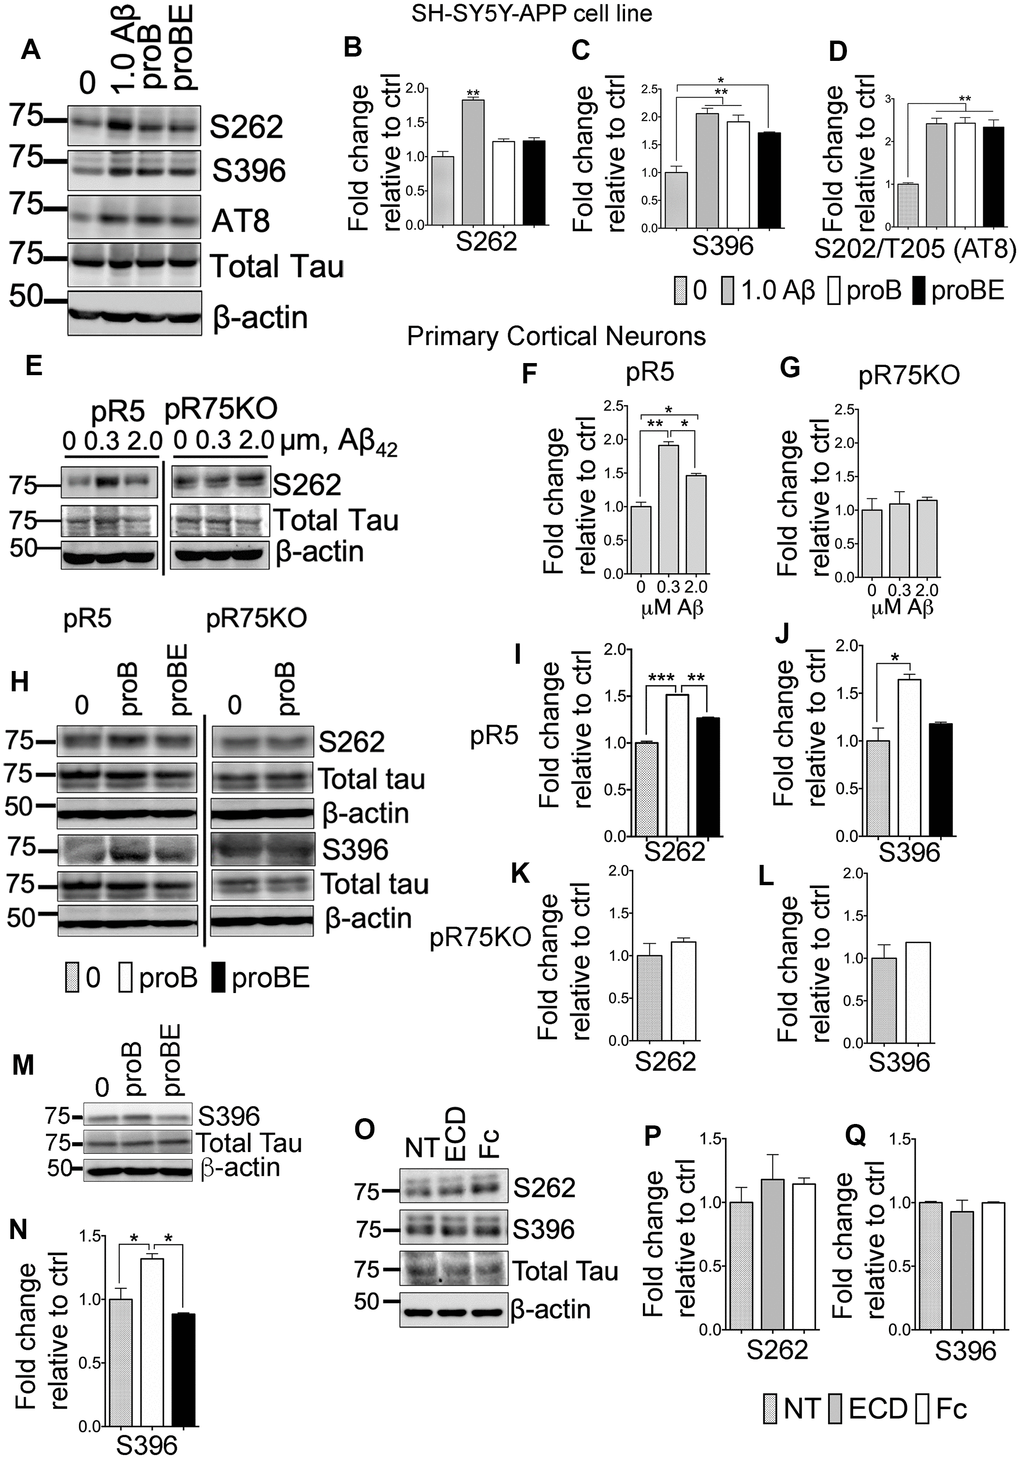 p75NTR ligands, Aβ and pro-BDNF, induced Tau hyperphosphorylation of neurons in vitro. (A) Protein blots of phosphorylated human Tau at sites S262, S396 and S202/T205 (AT8) in SH-SY5Y-APP cell. Treatments were control (0), Aβ42 (1.0 μM), proBDNF (30 ng/mL, proB), and proBDNF (30 ng/mL,) with p75ECD-Fc (10 μg/mL) (proBE). Protein band intensity quantification of phosphorylated human Tau at S262 (B), S396 (C) and S202/T205 (AT8) (D) in SH-SY5Y-APP cell line normalised with total human Tau and expressed as fold change relative to non-treated control (0). Data are represented as the mean ± SEM, n=3. (E) Protein blots of phosphorylated human Tau at site S262 in primary cortical neurons from pR5 and pR75KO mice treated with different concentrations of Aβ42 (0, 0.3, 2.0 μM). Protein band intensity quantification of phosphorylated human Tau at S262 in neurons from pR5 (F) and pR75KO (G) mice normalized with total human Tau and expressed as fold change relative to non-treated control (0). Data are represented as the mean ± SEM. Experiment was done in 3 replicates, each replicate has n=12 animals. (H) Protein blots of phosphorylated human Tau at sites S262 and S396 in primary cortical neurons frompR5 and pR75KO mice treated with proB and proBE. Protein band intensity quantification of phosphorylated human Tau at S262 and S396 in neurons from pR5 (I, J) and pR75KO (K, L) mice normalized with total human Tau and expressed as fold change relative to non-treated control (0) Data are represented as the mean ± SEM. Experiment was done in 3 replicates, each replicate has n=12 animals. (M) Protein blots of phosphorylated human Tau at site S396 in primary cortical neurons from Wt mice treated with proB and proBE. (N) Protein band intensity quantification of phosphorylated human Tau S396 in Wt mice normalized with total human Tau and expressed as fold change relative to non-treated control (0) Data are represented as the mean ± SEM. Experiment was done in 3 replicates, each replicate has n=12 animals. (O) Protein blots of phosphorylated human Tau at sites S262 and S396 in primary cortical neurons of Wt mice treated with p75ECD-Fc (10 μg/mL, ECD) and Human-Fc (10 μg/mL). Protein band intensity quantification of phosphorylated human Tau at sites S262 (P) and S396 (Q) in Wt mice normalized with total human Tau and expressed as fold change relative to non-treated control (0). Data are represented as the mean ± SEM, n=6 animals. All statistical comparisons were performed using one-way ANOVA and Tukey’s test. Statistical significance: Statistical significance: *P, ***P.